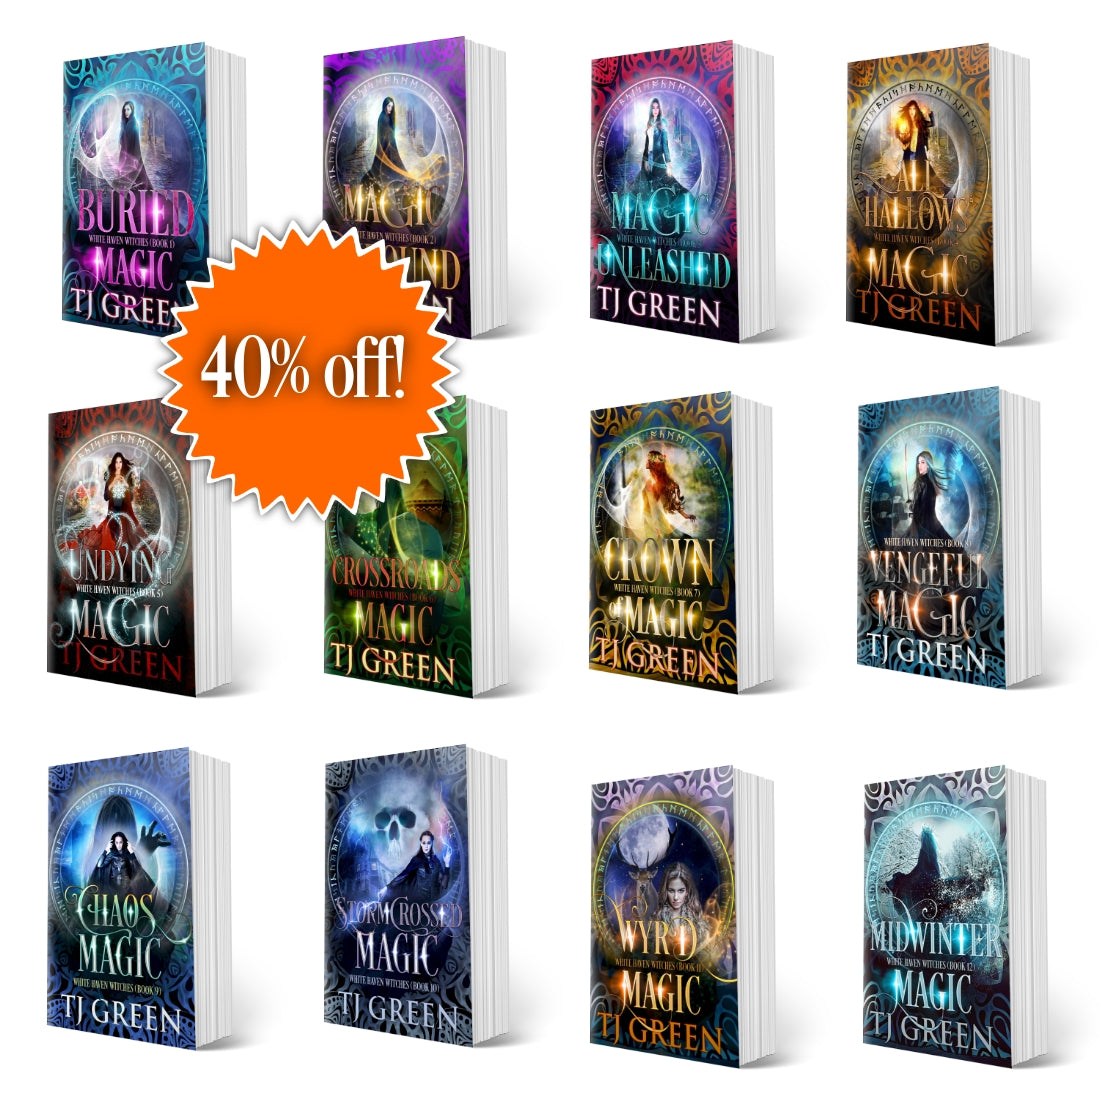 White Haven Witches paperback bundle book 1 -12 Paranormal mysteries, witchcraft, magic, urban fantasy